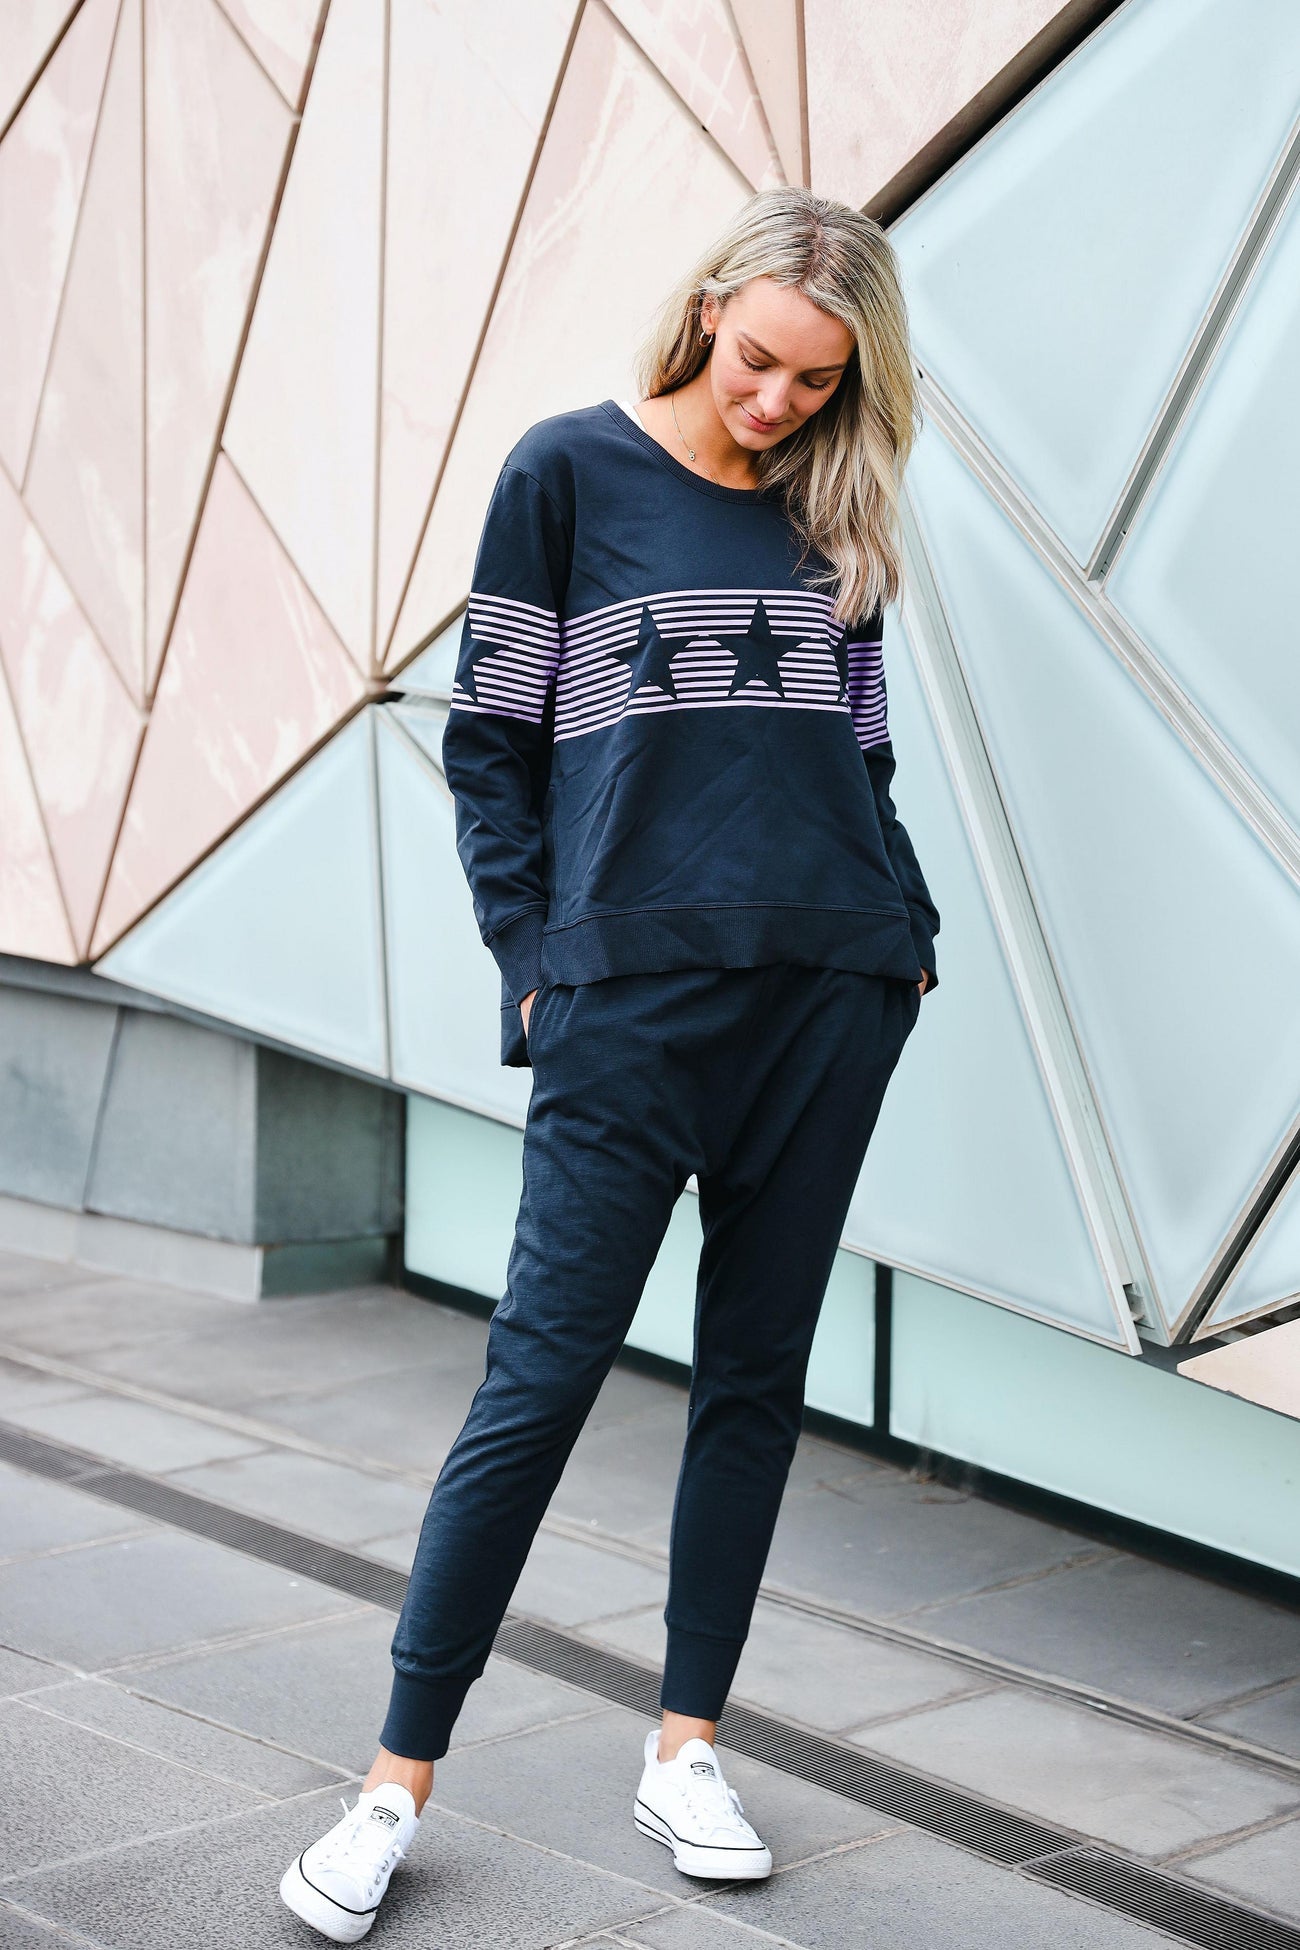 Alana Banded Stripe Star Sweater (Ink/Dahlia) - Something For Me​​